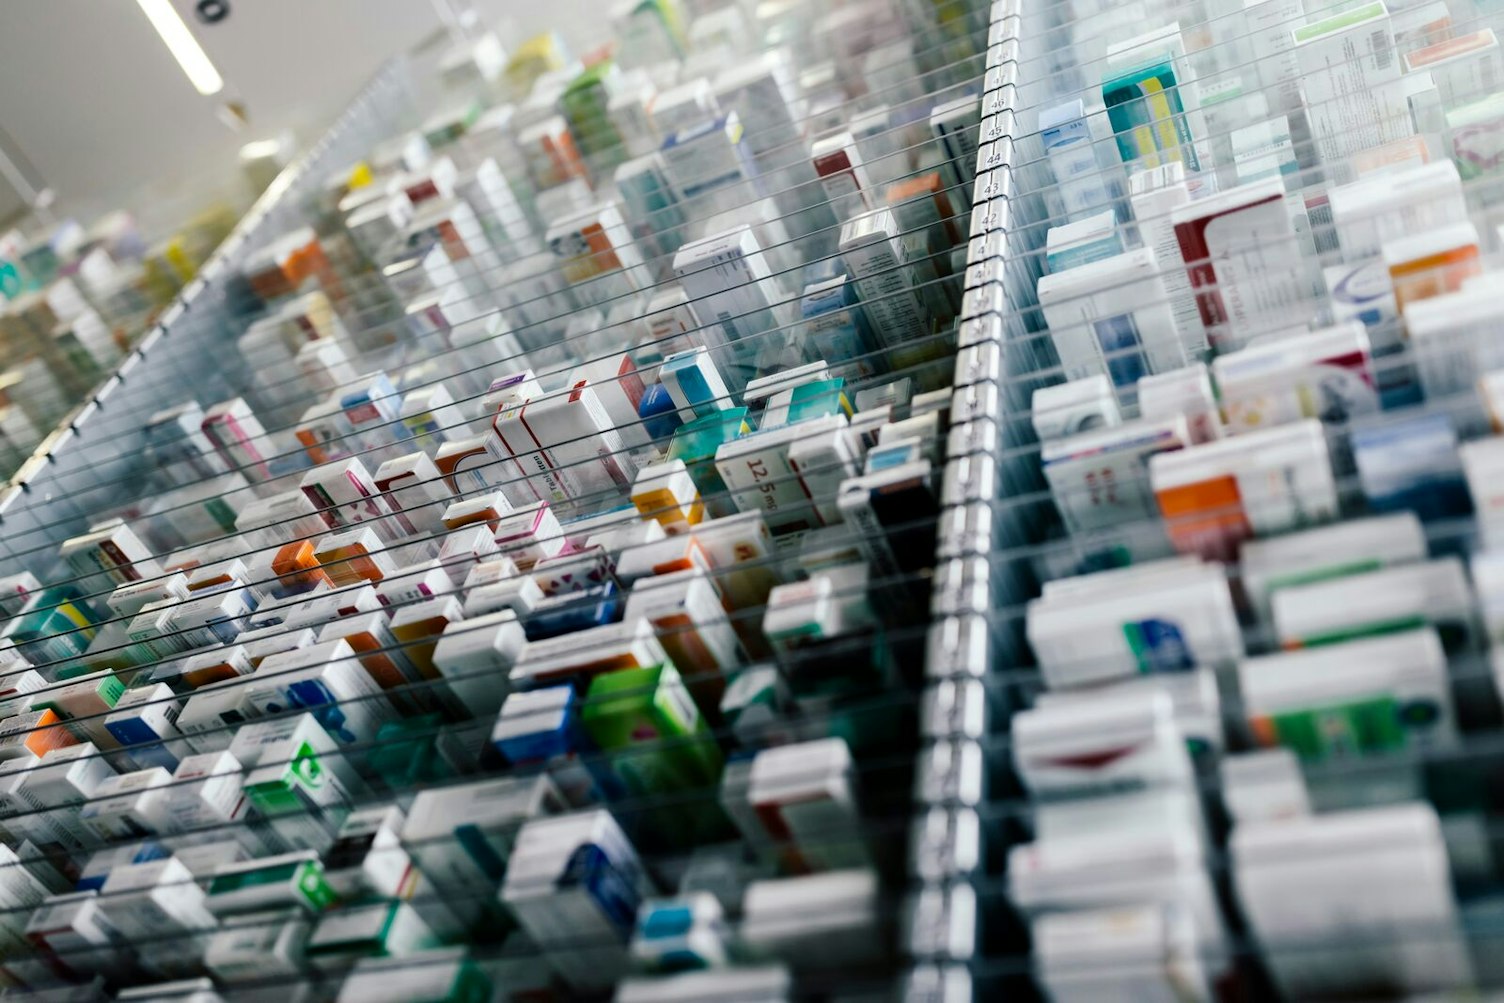 Medicine in Shelves in Commissioning Machine in Pharmacy